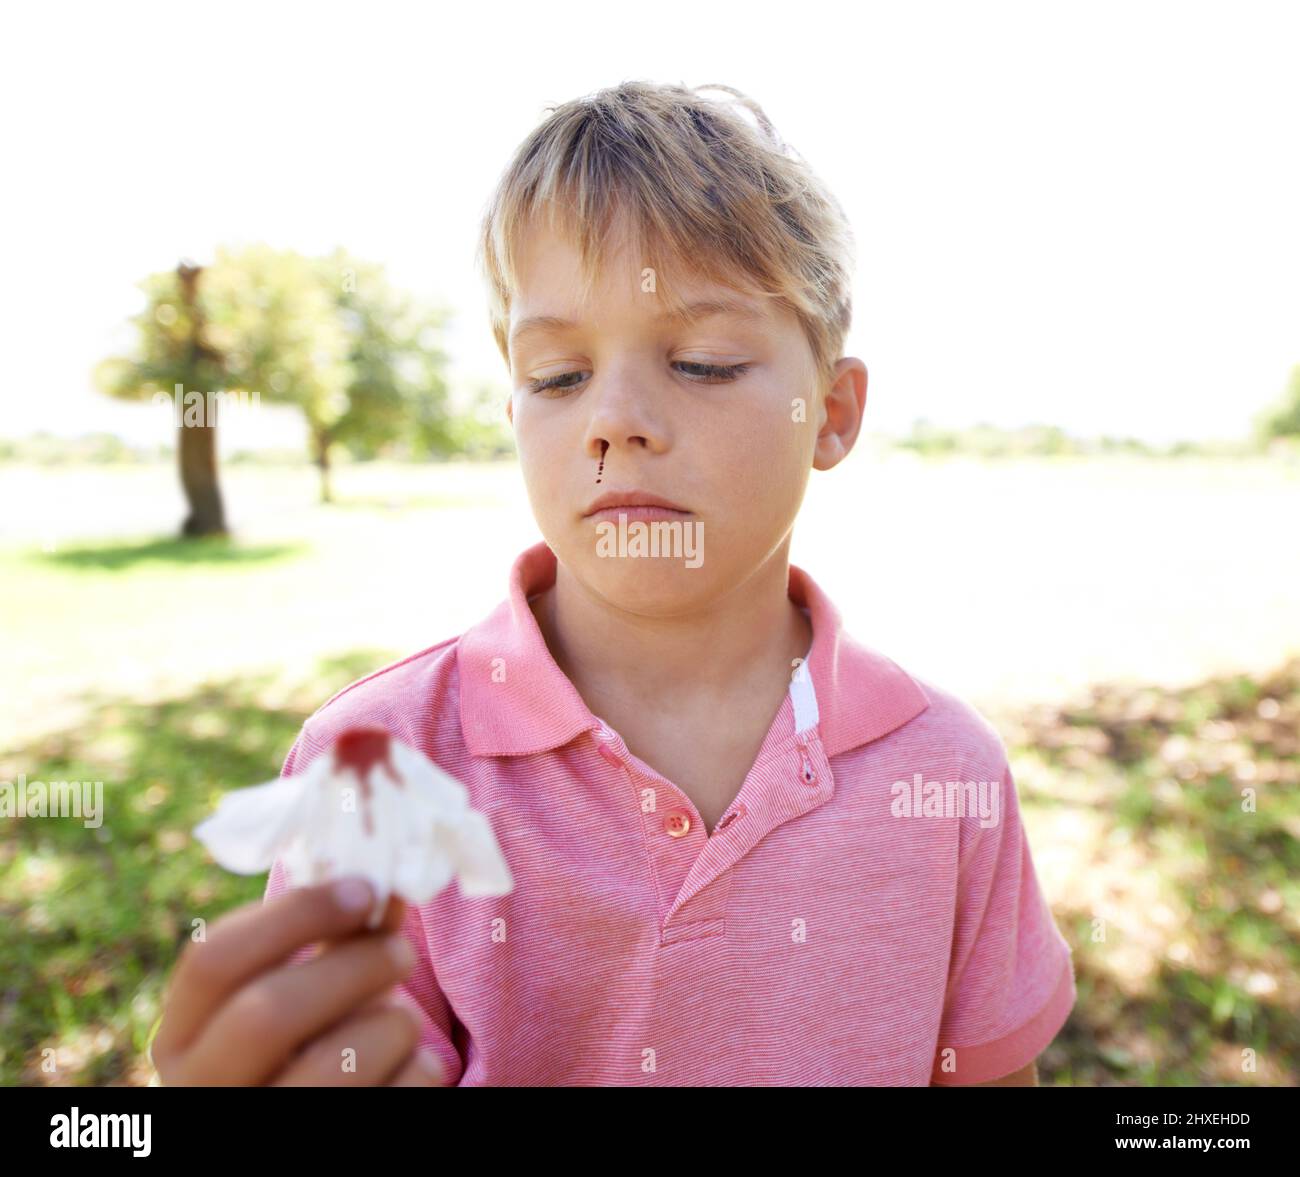 Boys will be boys. A little boy with a nosebleed standing outside. Stock Photo